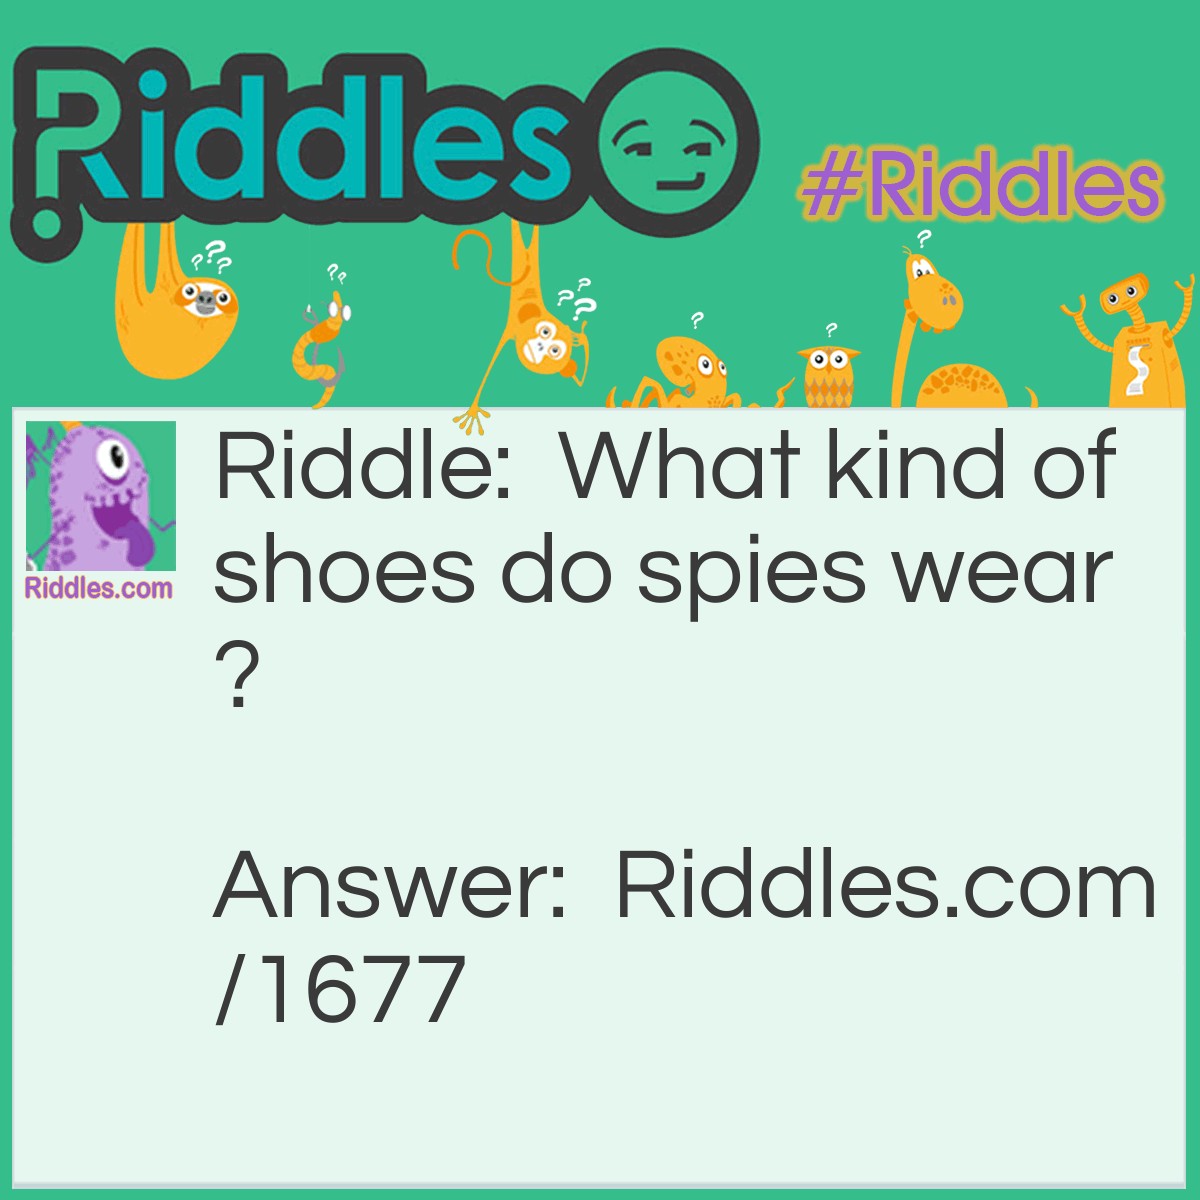 Riddle: What kind of shoes do spies wear? Answer: Sneakers.